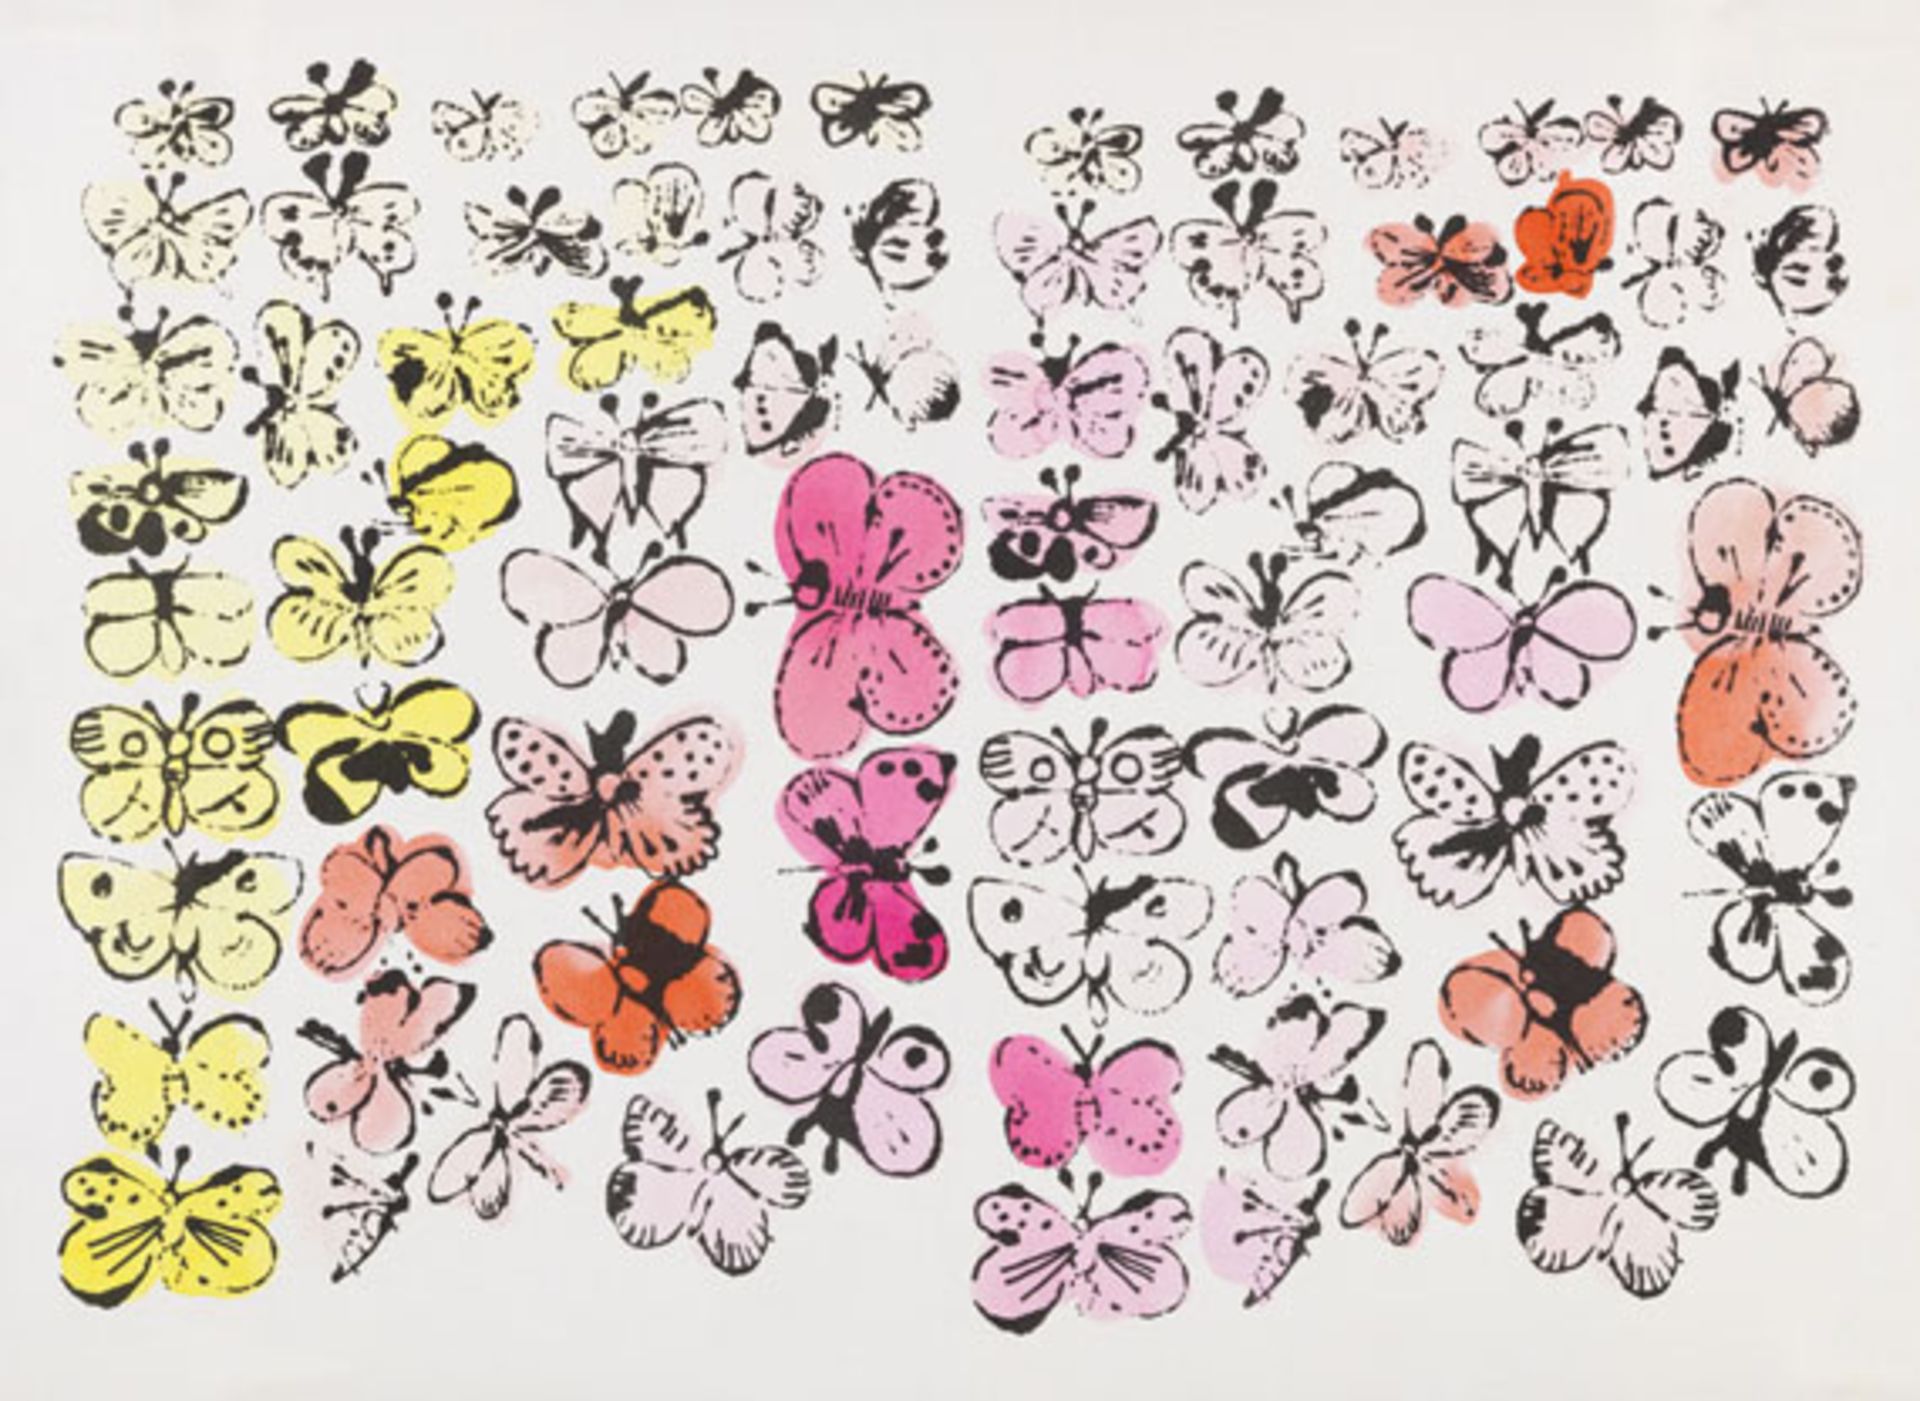 Andy Warhol 1928 Pittsburgh - 1987 New York Happy Butterflies / Large. Um 1956. Mit Aquarell